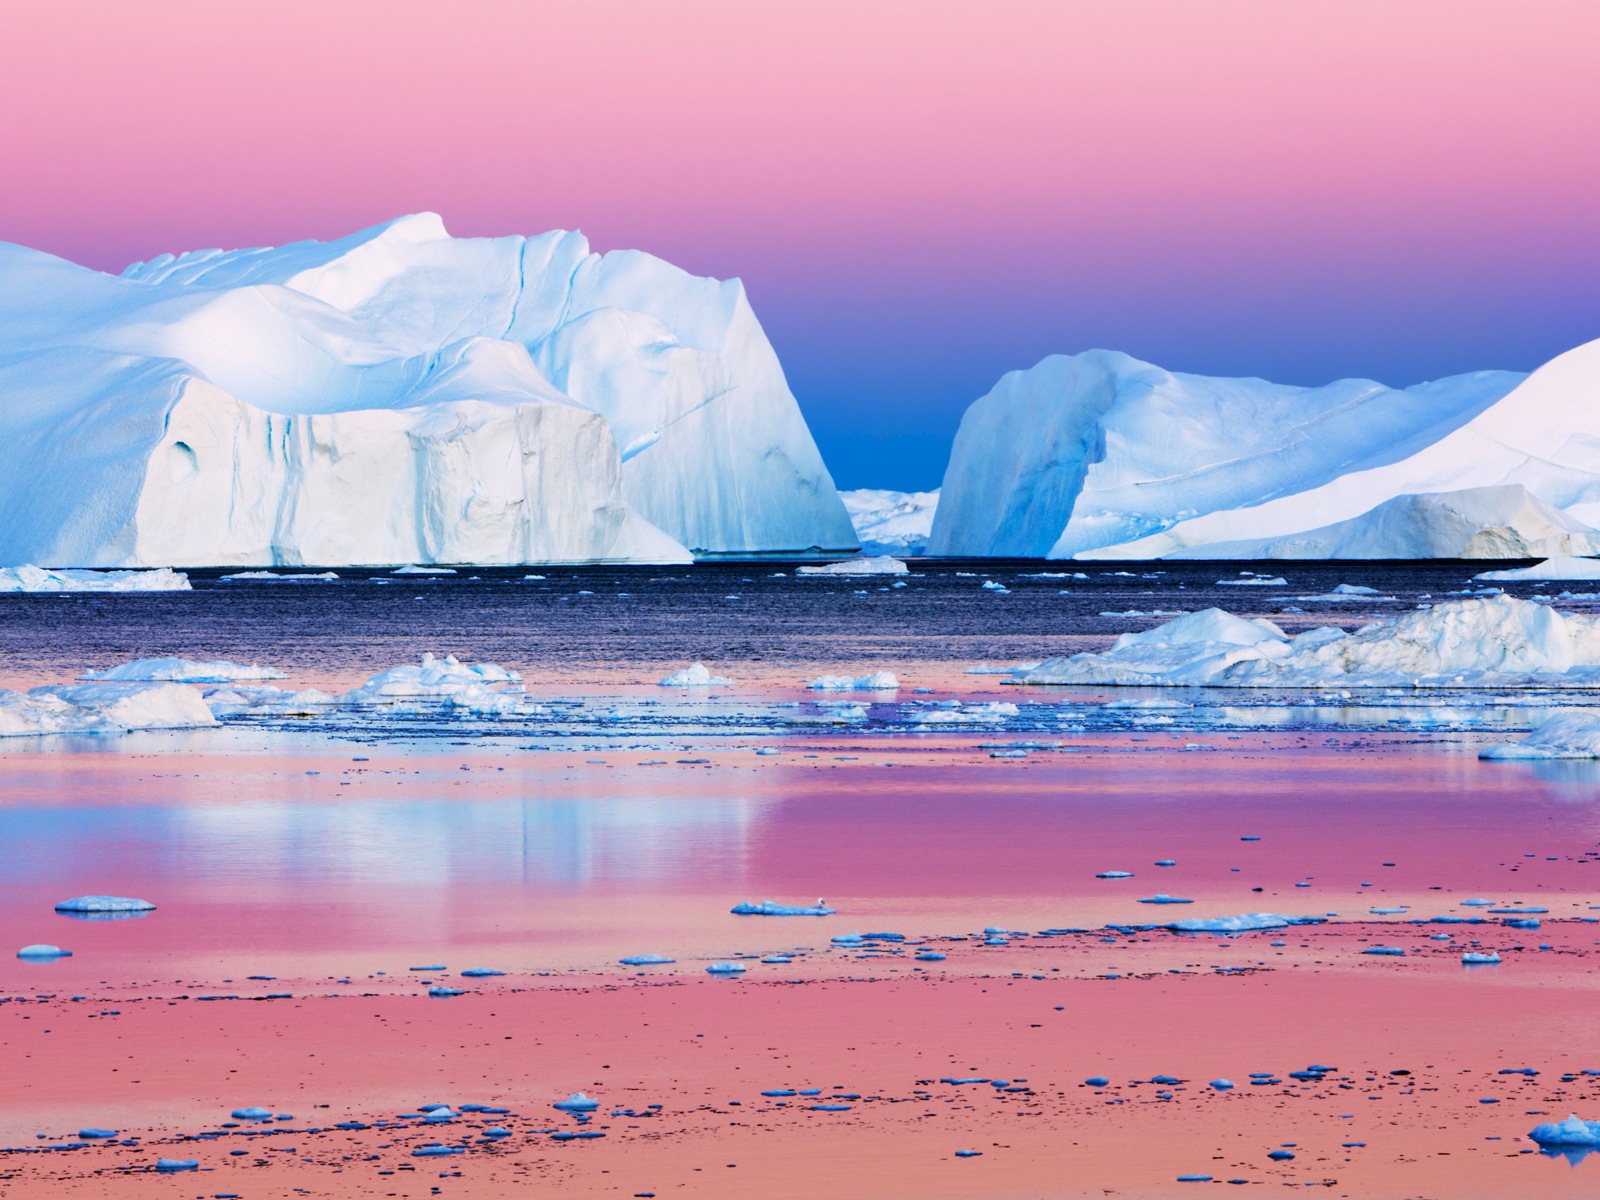 Windows 8 Wallpapers: Arctic, the nature ecological landscape, arctic animals #7 - 1600x1200